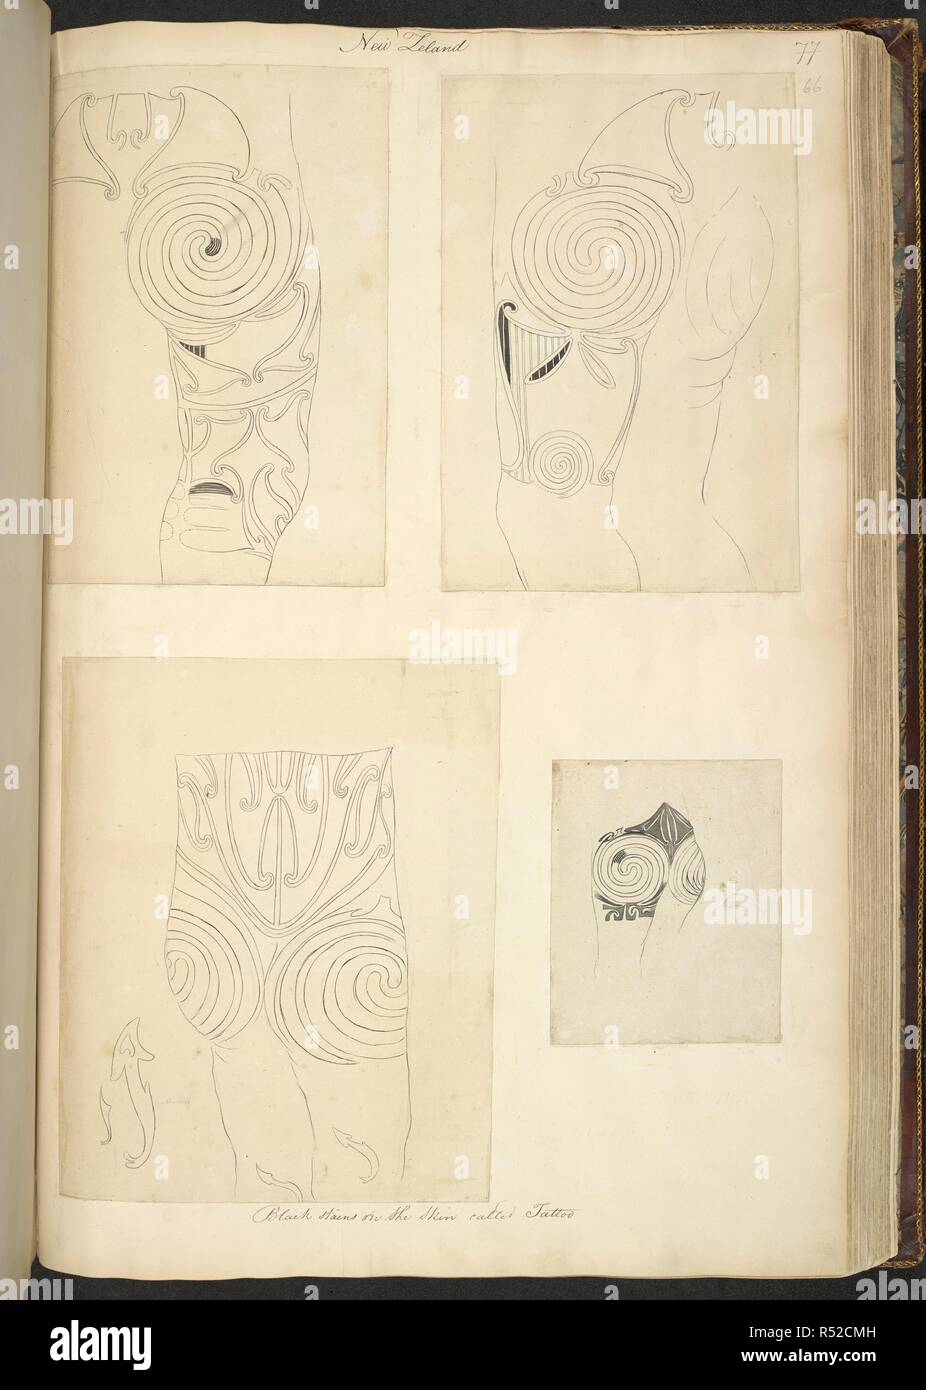 Four drawings of tattoos; from studies made of tattoos on the buttocks of some Maoris who visited the Endeavour off Cape Brett, New Zealand, on 26th November 1769. A Collection of Drawings made in the Countries visited by Captain Cook in his First Voyage. 1768-1771. 1769. Source: Add. 23920, f.66. Language: English. Author: PARKINSON, SYDNEY. Stock Photo